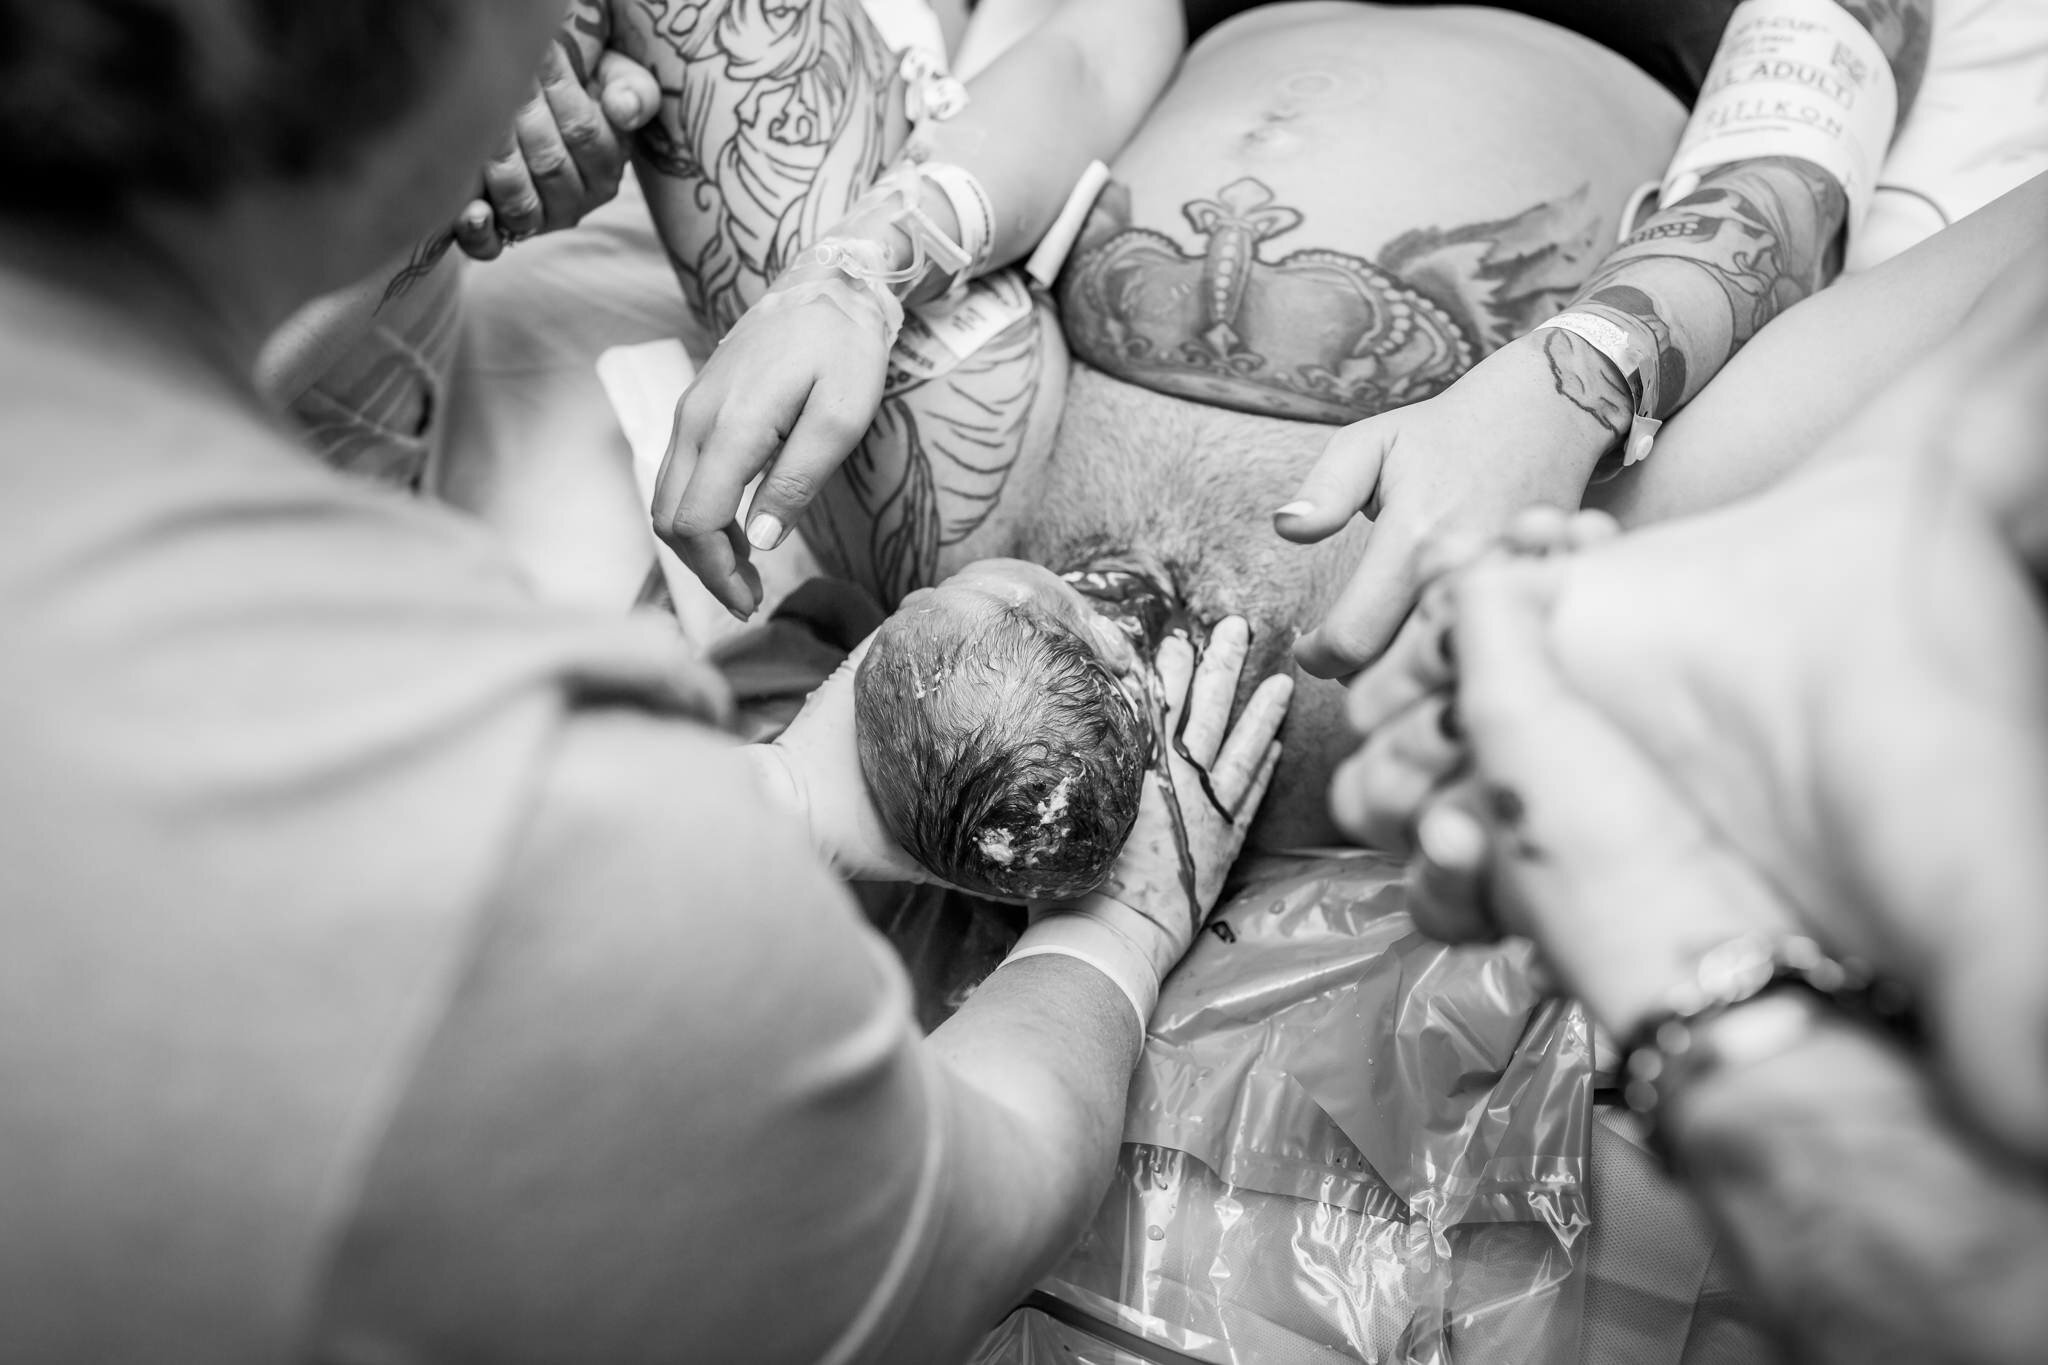 baby crowning during hospital birth